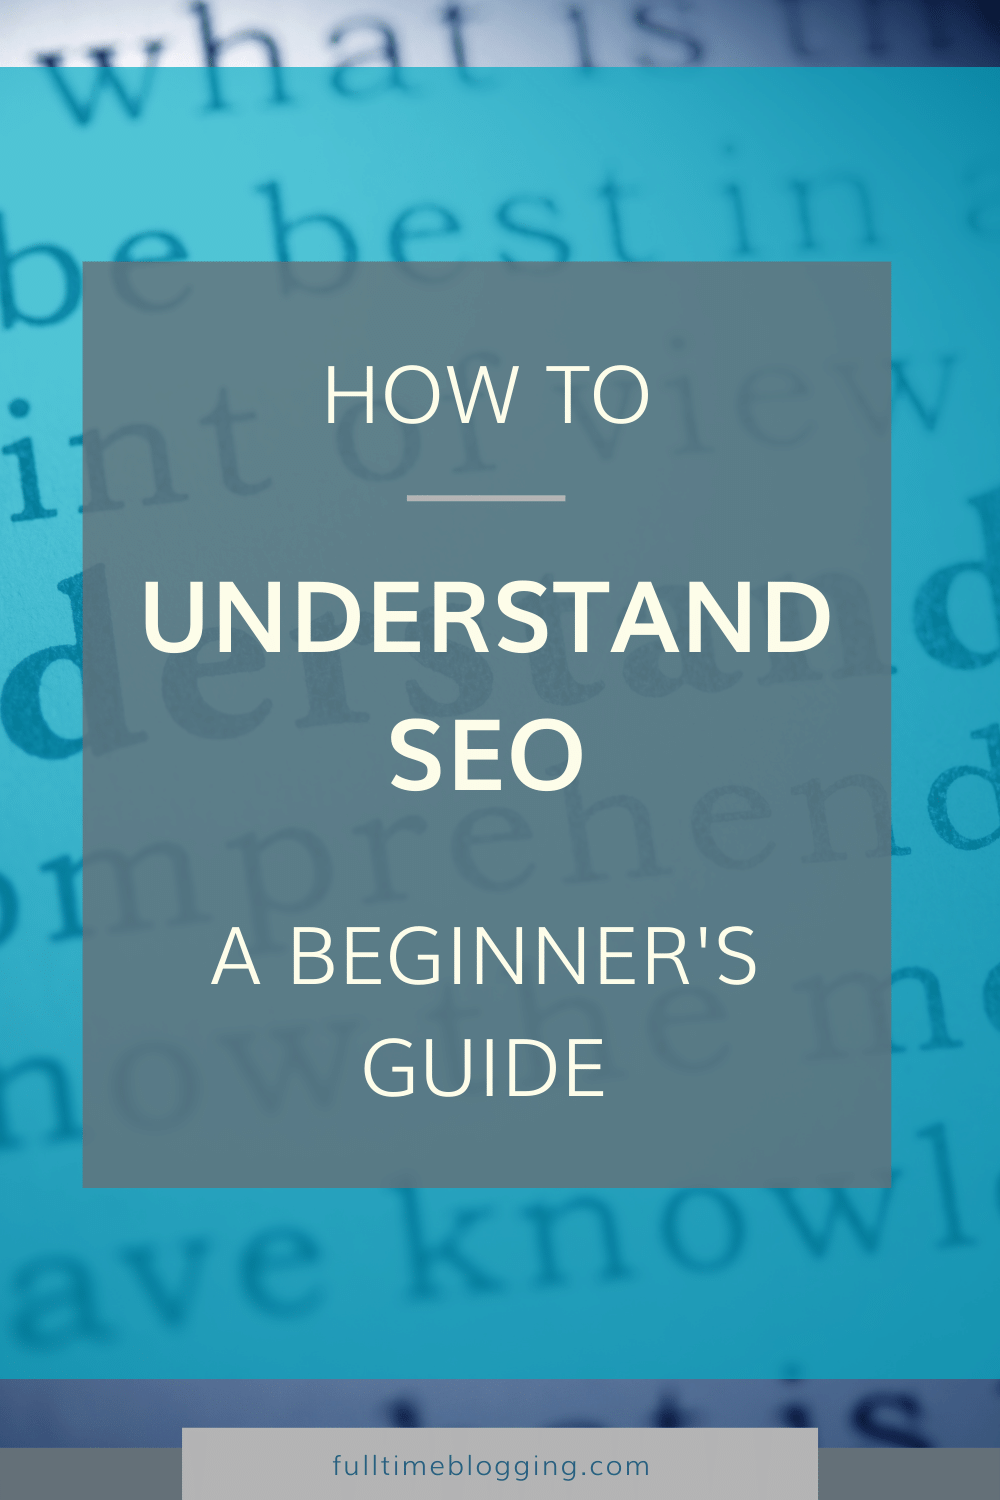 How To Understand SEO